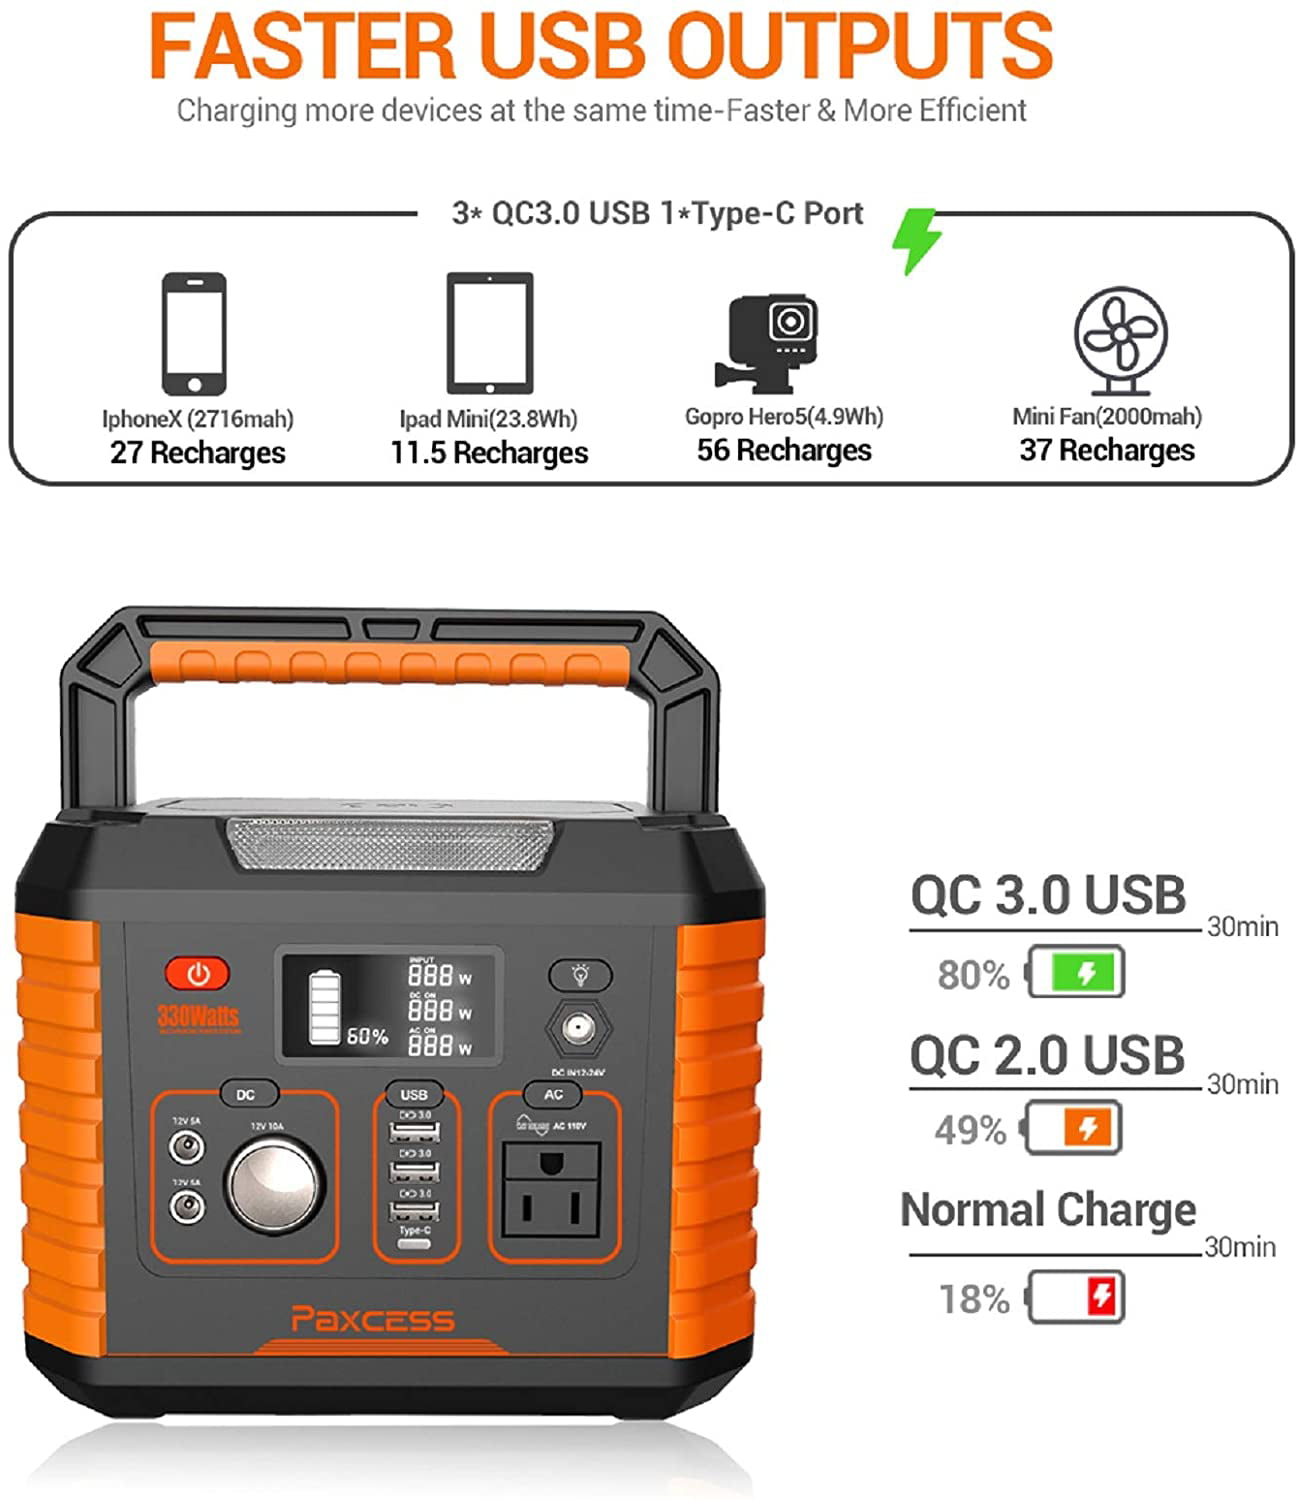 Details about   330W 81000mAh 300Wh Portable Power Station Solar Generator Camping CPAP Battery 